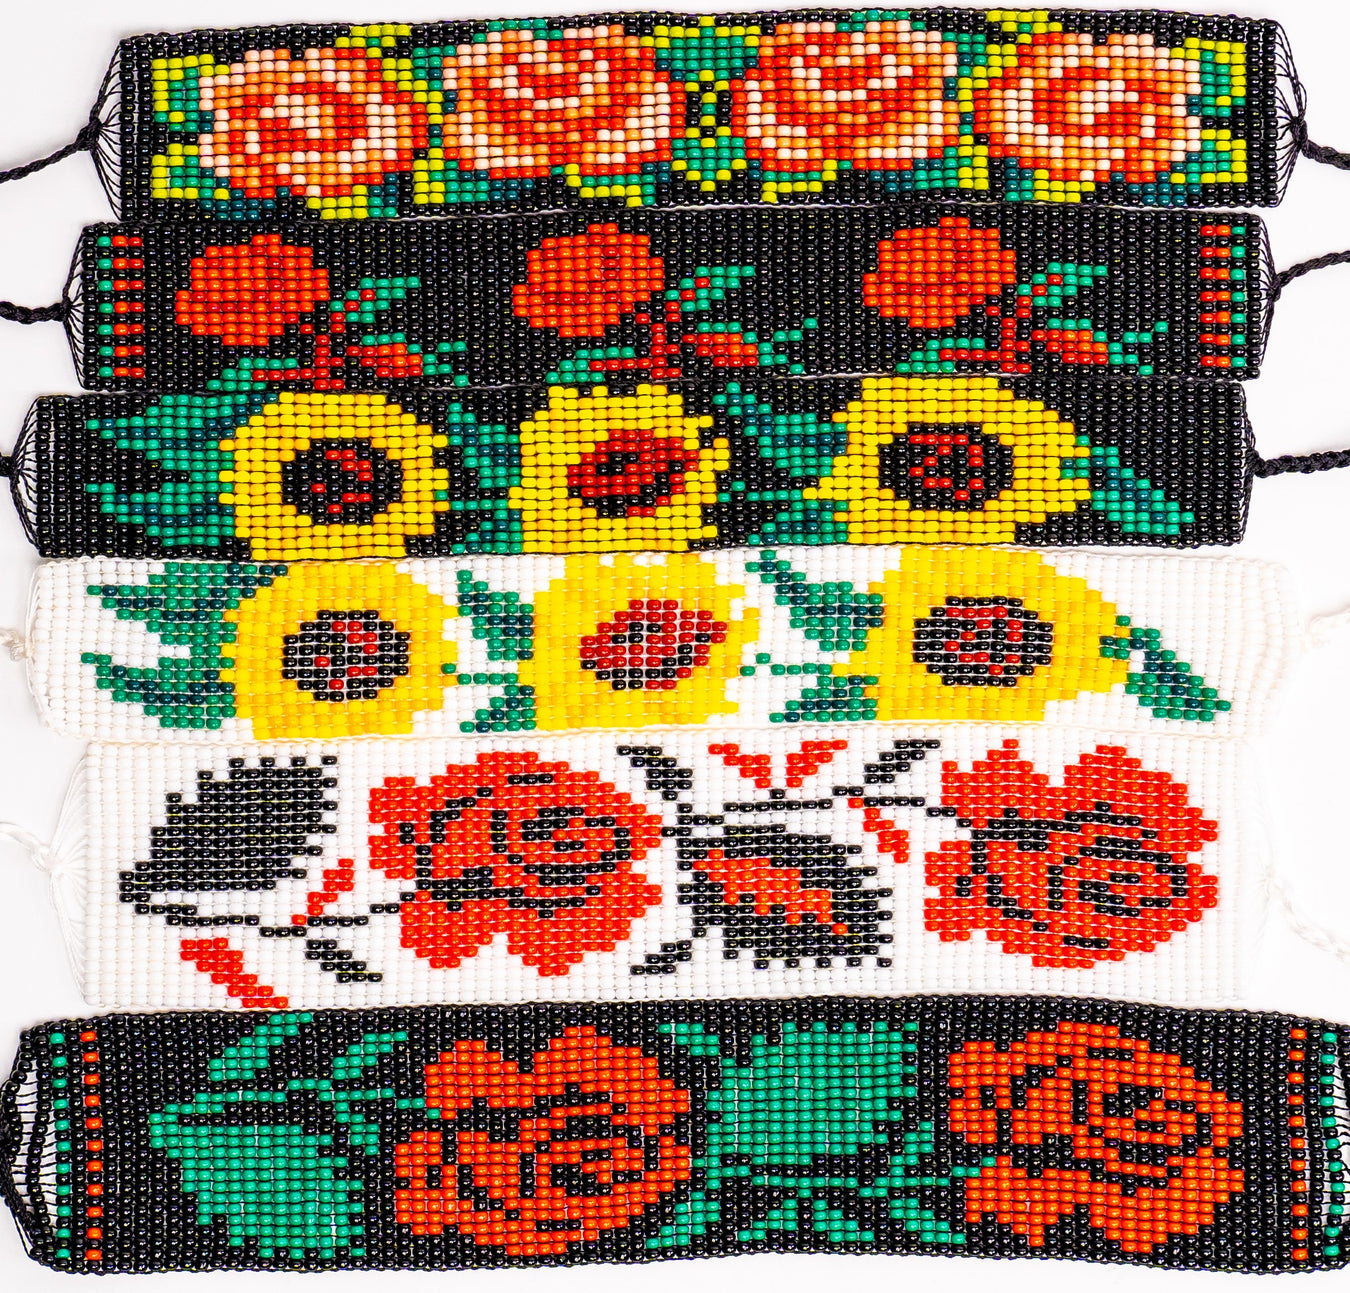 Handcrafted art inspired by traditional Huichol culture, featuring vibrant intricate beadwork. Each piece embodies rich symbolism and cultural heritage, meticulously crafted by indigenous artisans. Discover a world of color, texture, and history